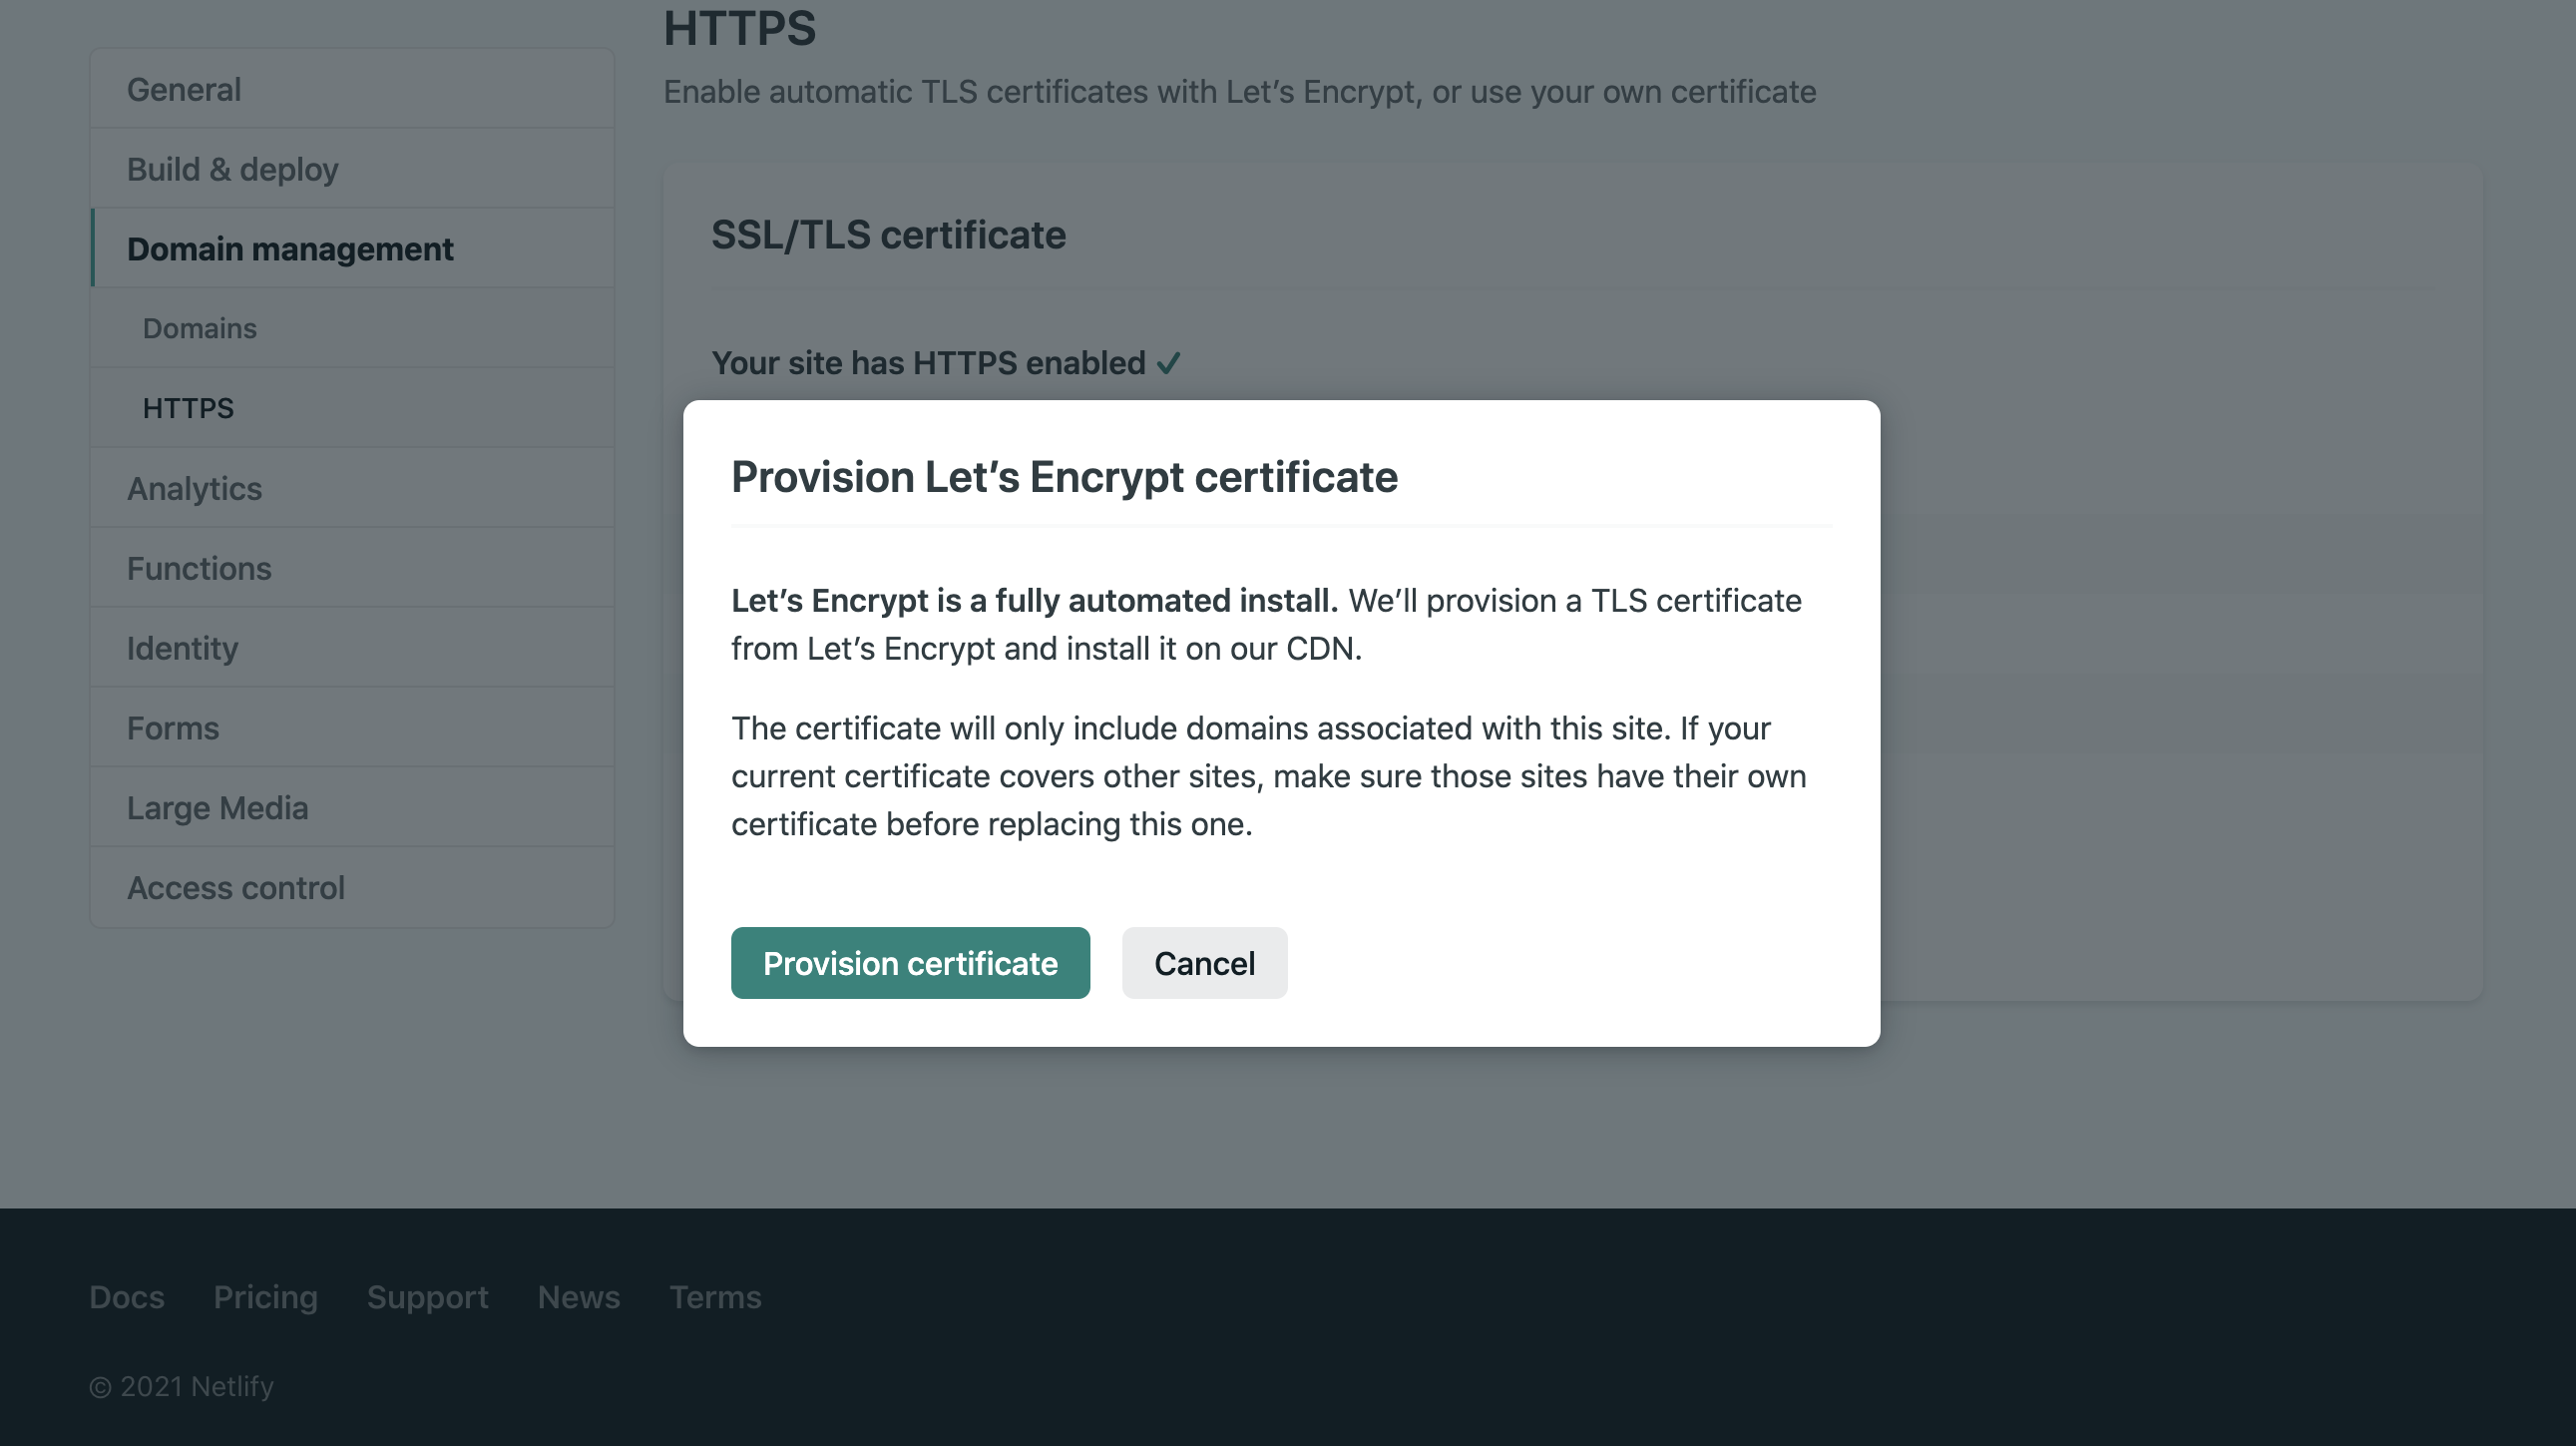 screenshot of "provision let's encrypt certificate" prompt in the Netlify site dashboard